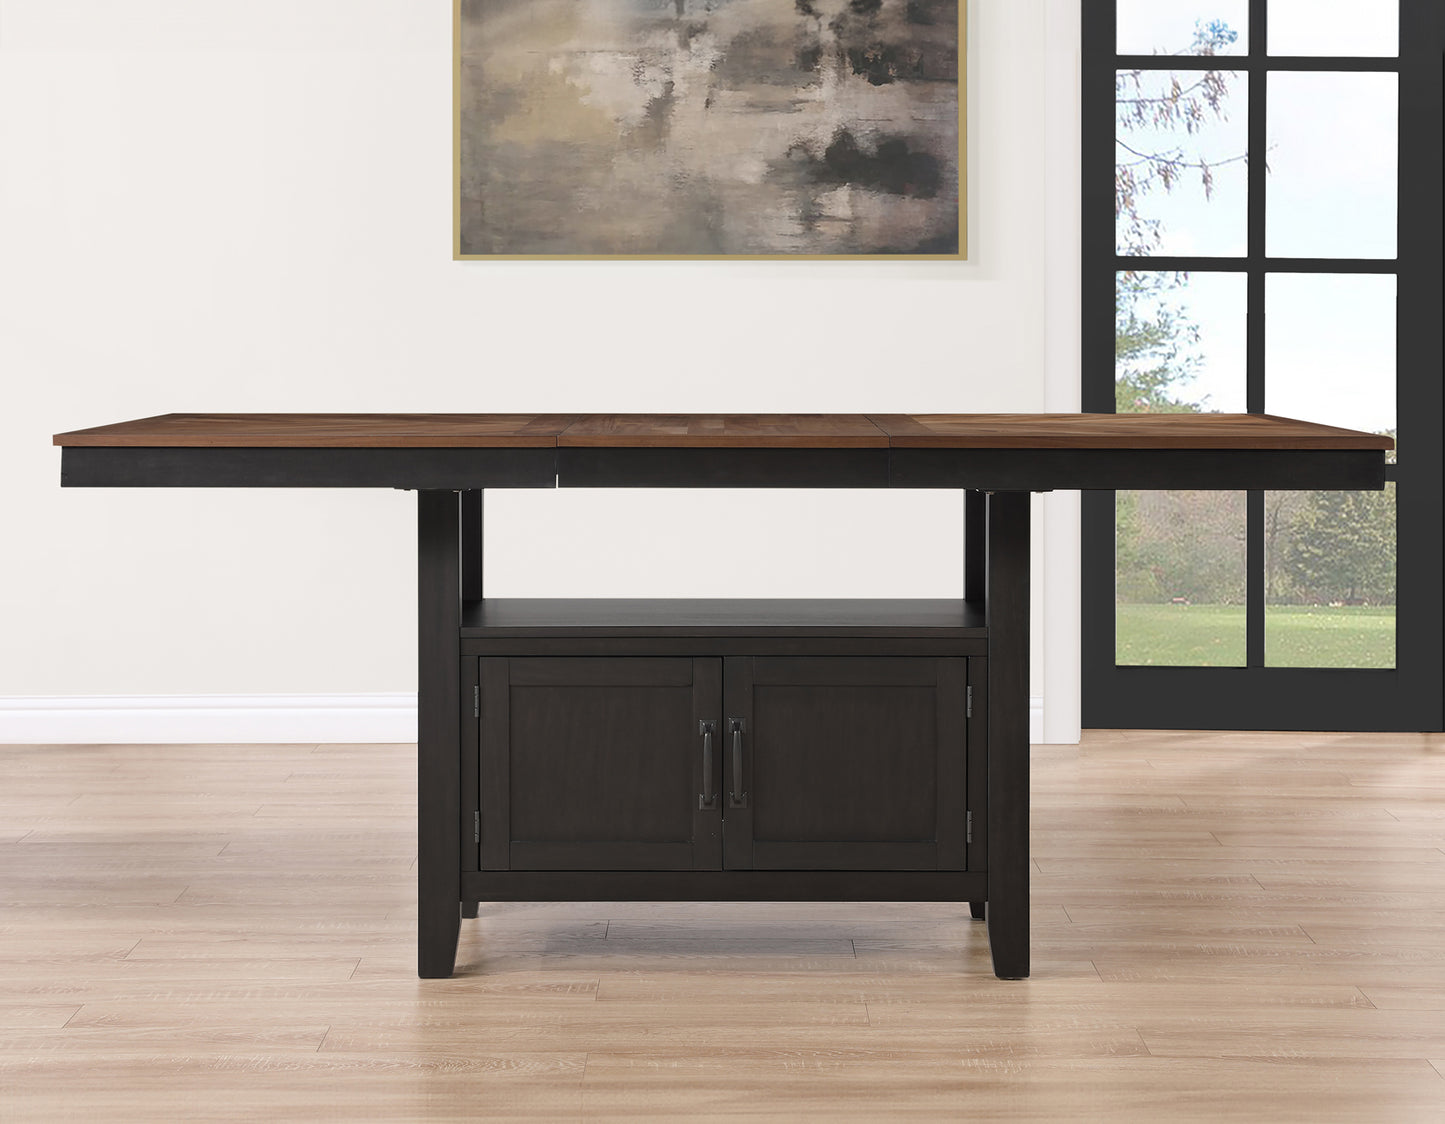 Bermuda 60-80″ Storage Counter Table with 20″ Leaf